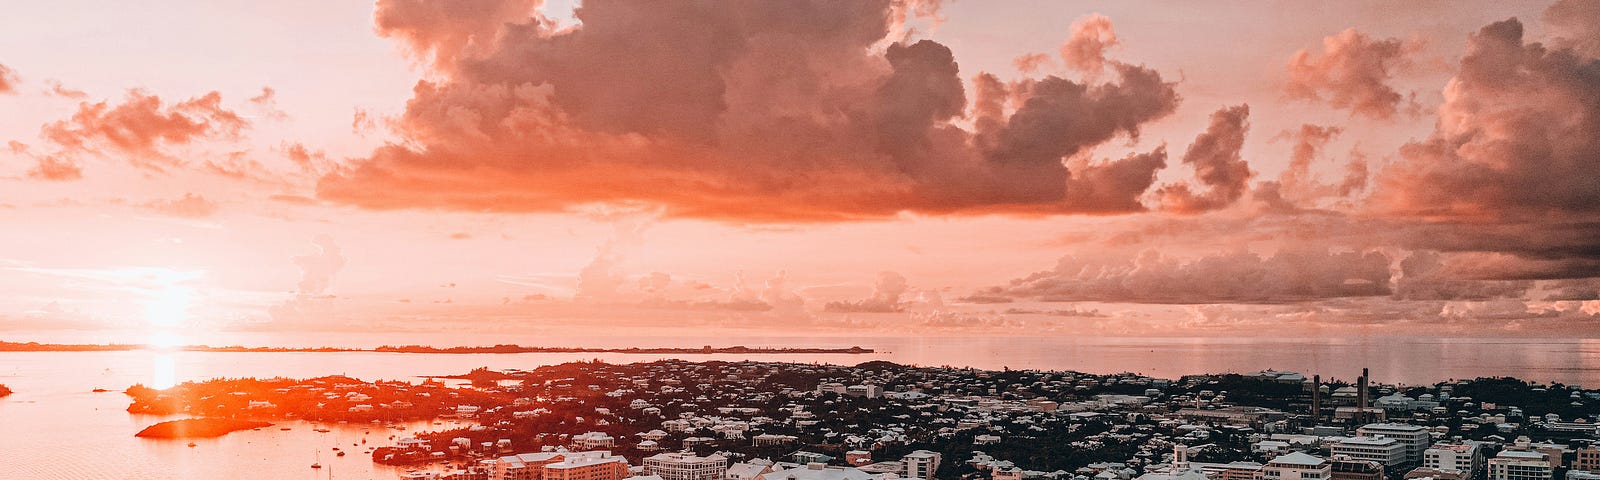 A picture of Bermuda’s main island taken from above at sunset.